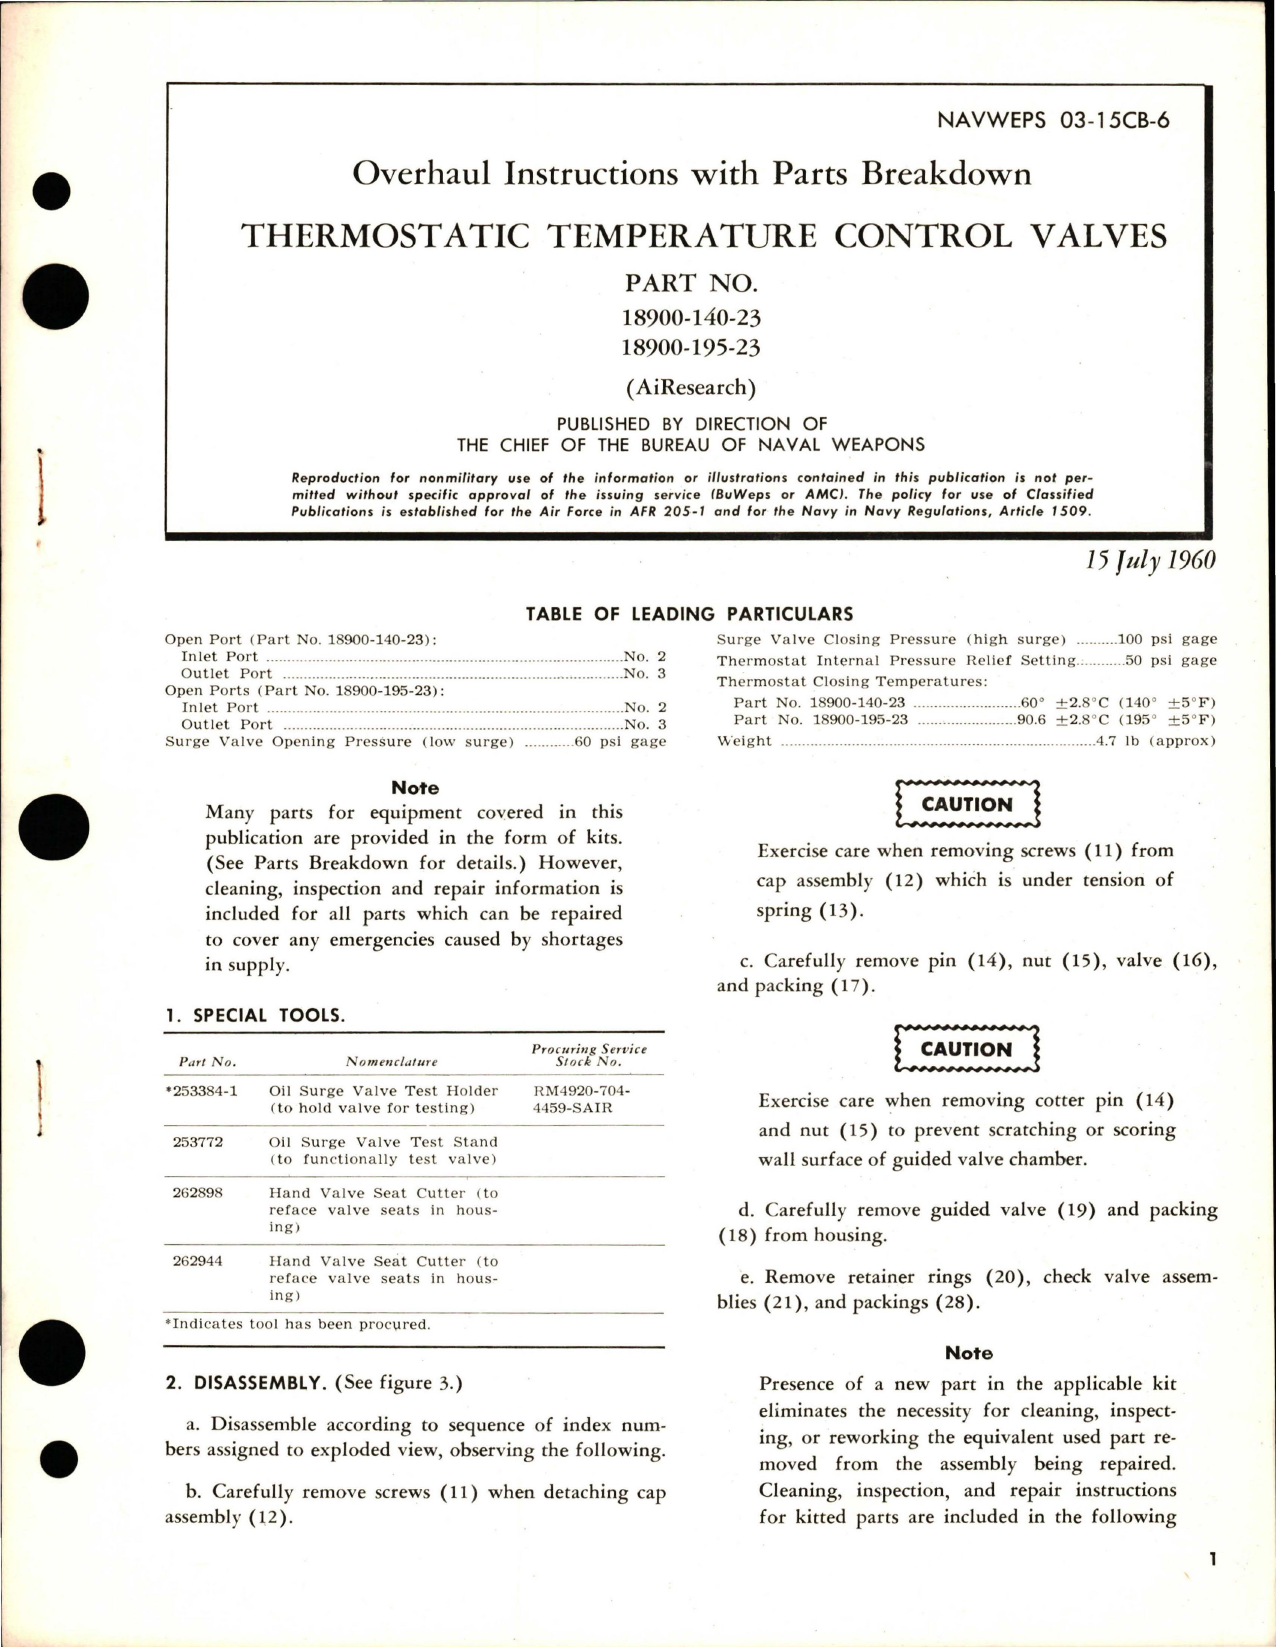 Sample page 1 from AirCorps Library document: Overhaul Instructions with Parts Breakdown for Thermostatic Temperature Control Valves - Parts 18900-140-23 and 18900-195-23